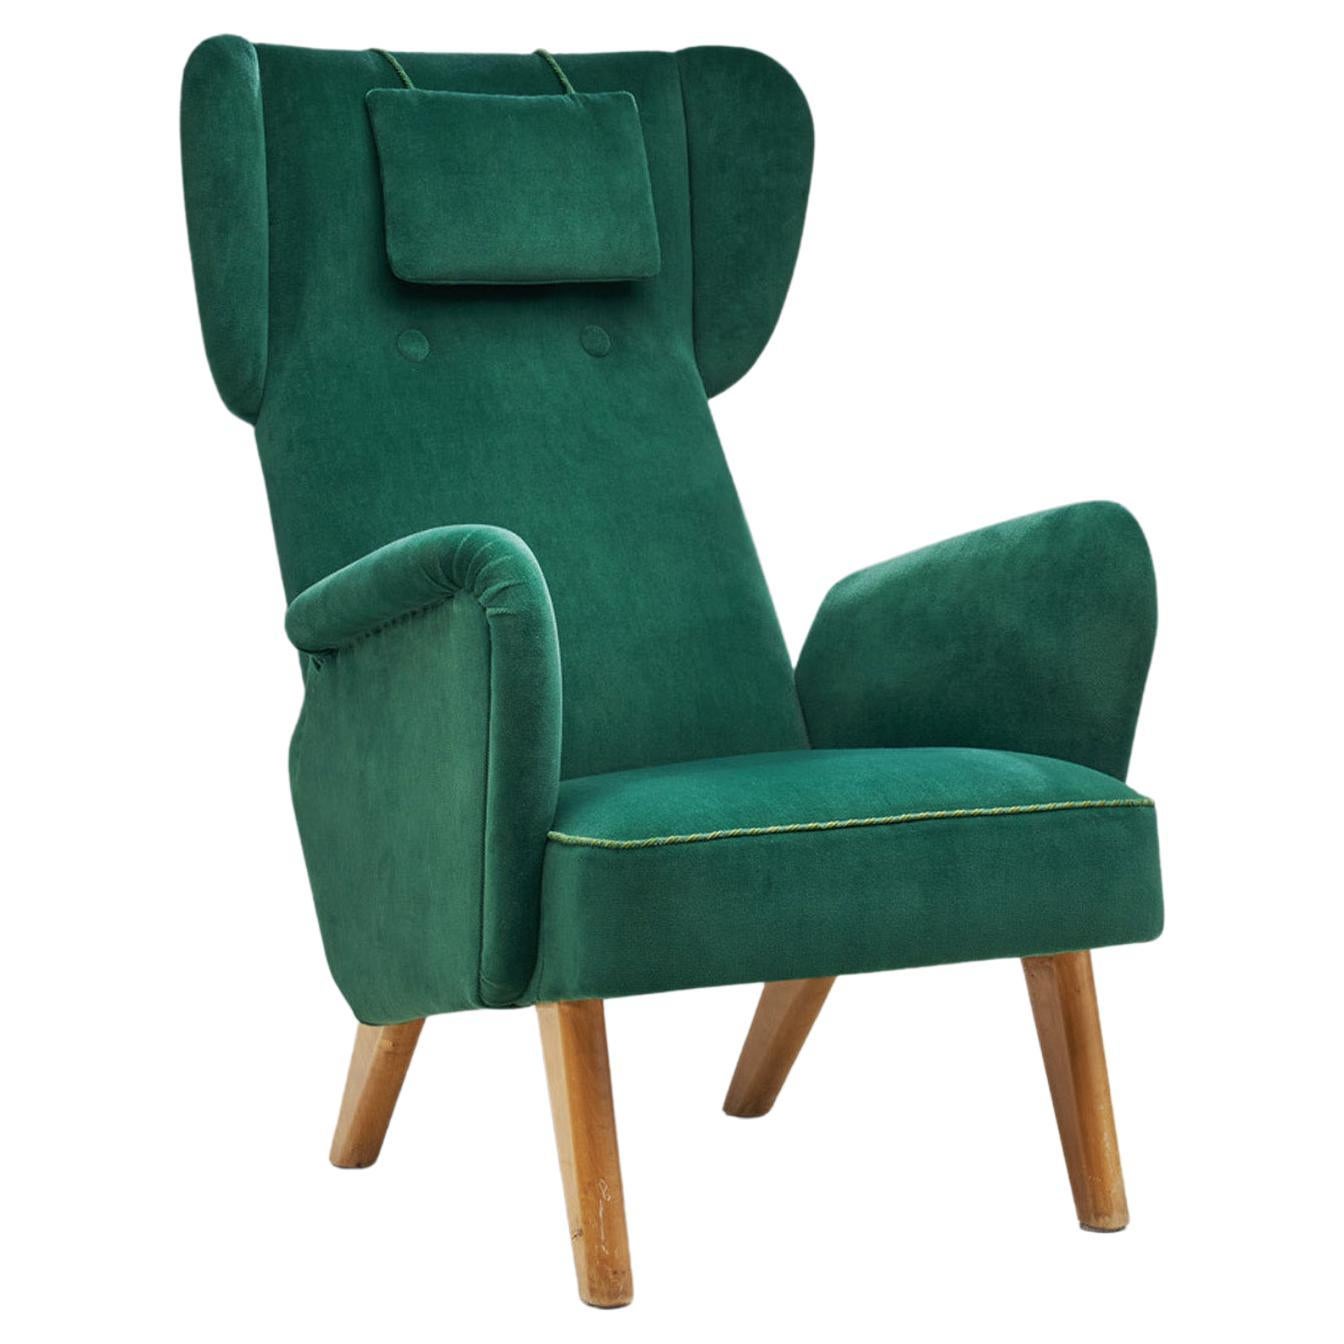 Carl Gustaf Hiort Af Ornäs Armchair for Hiort Tuote Puunveisto, Finland Mid-1940 For Sale